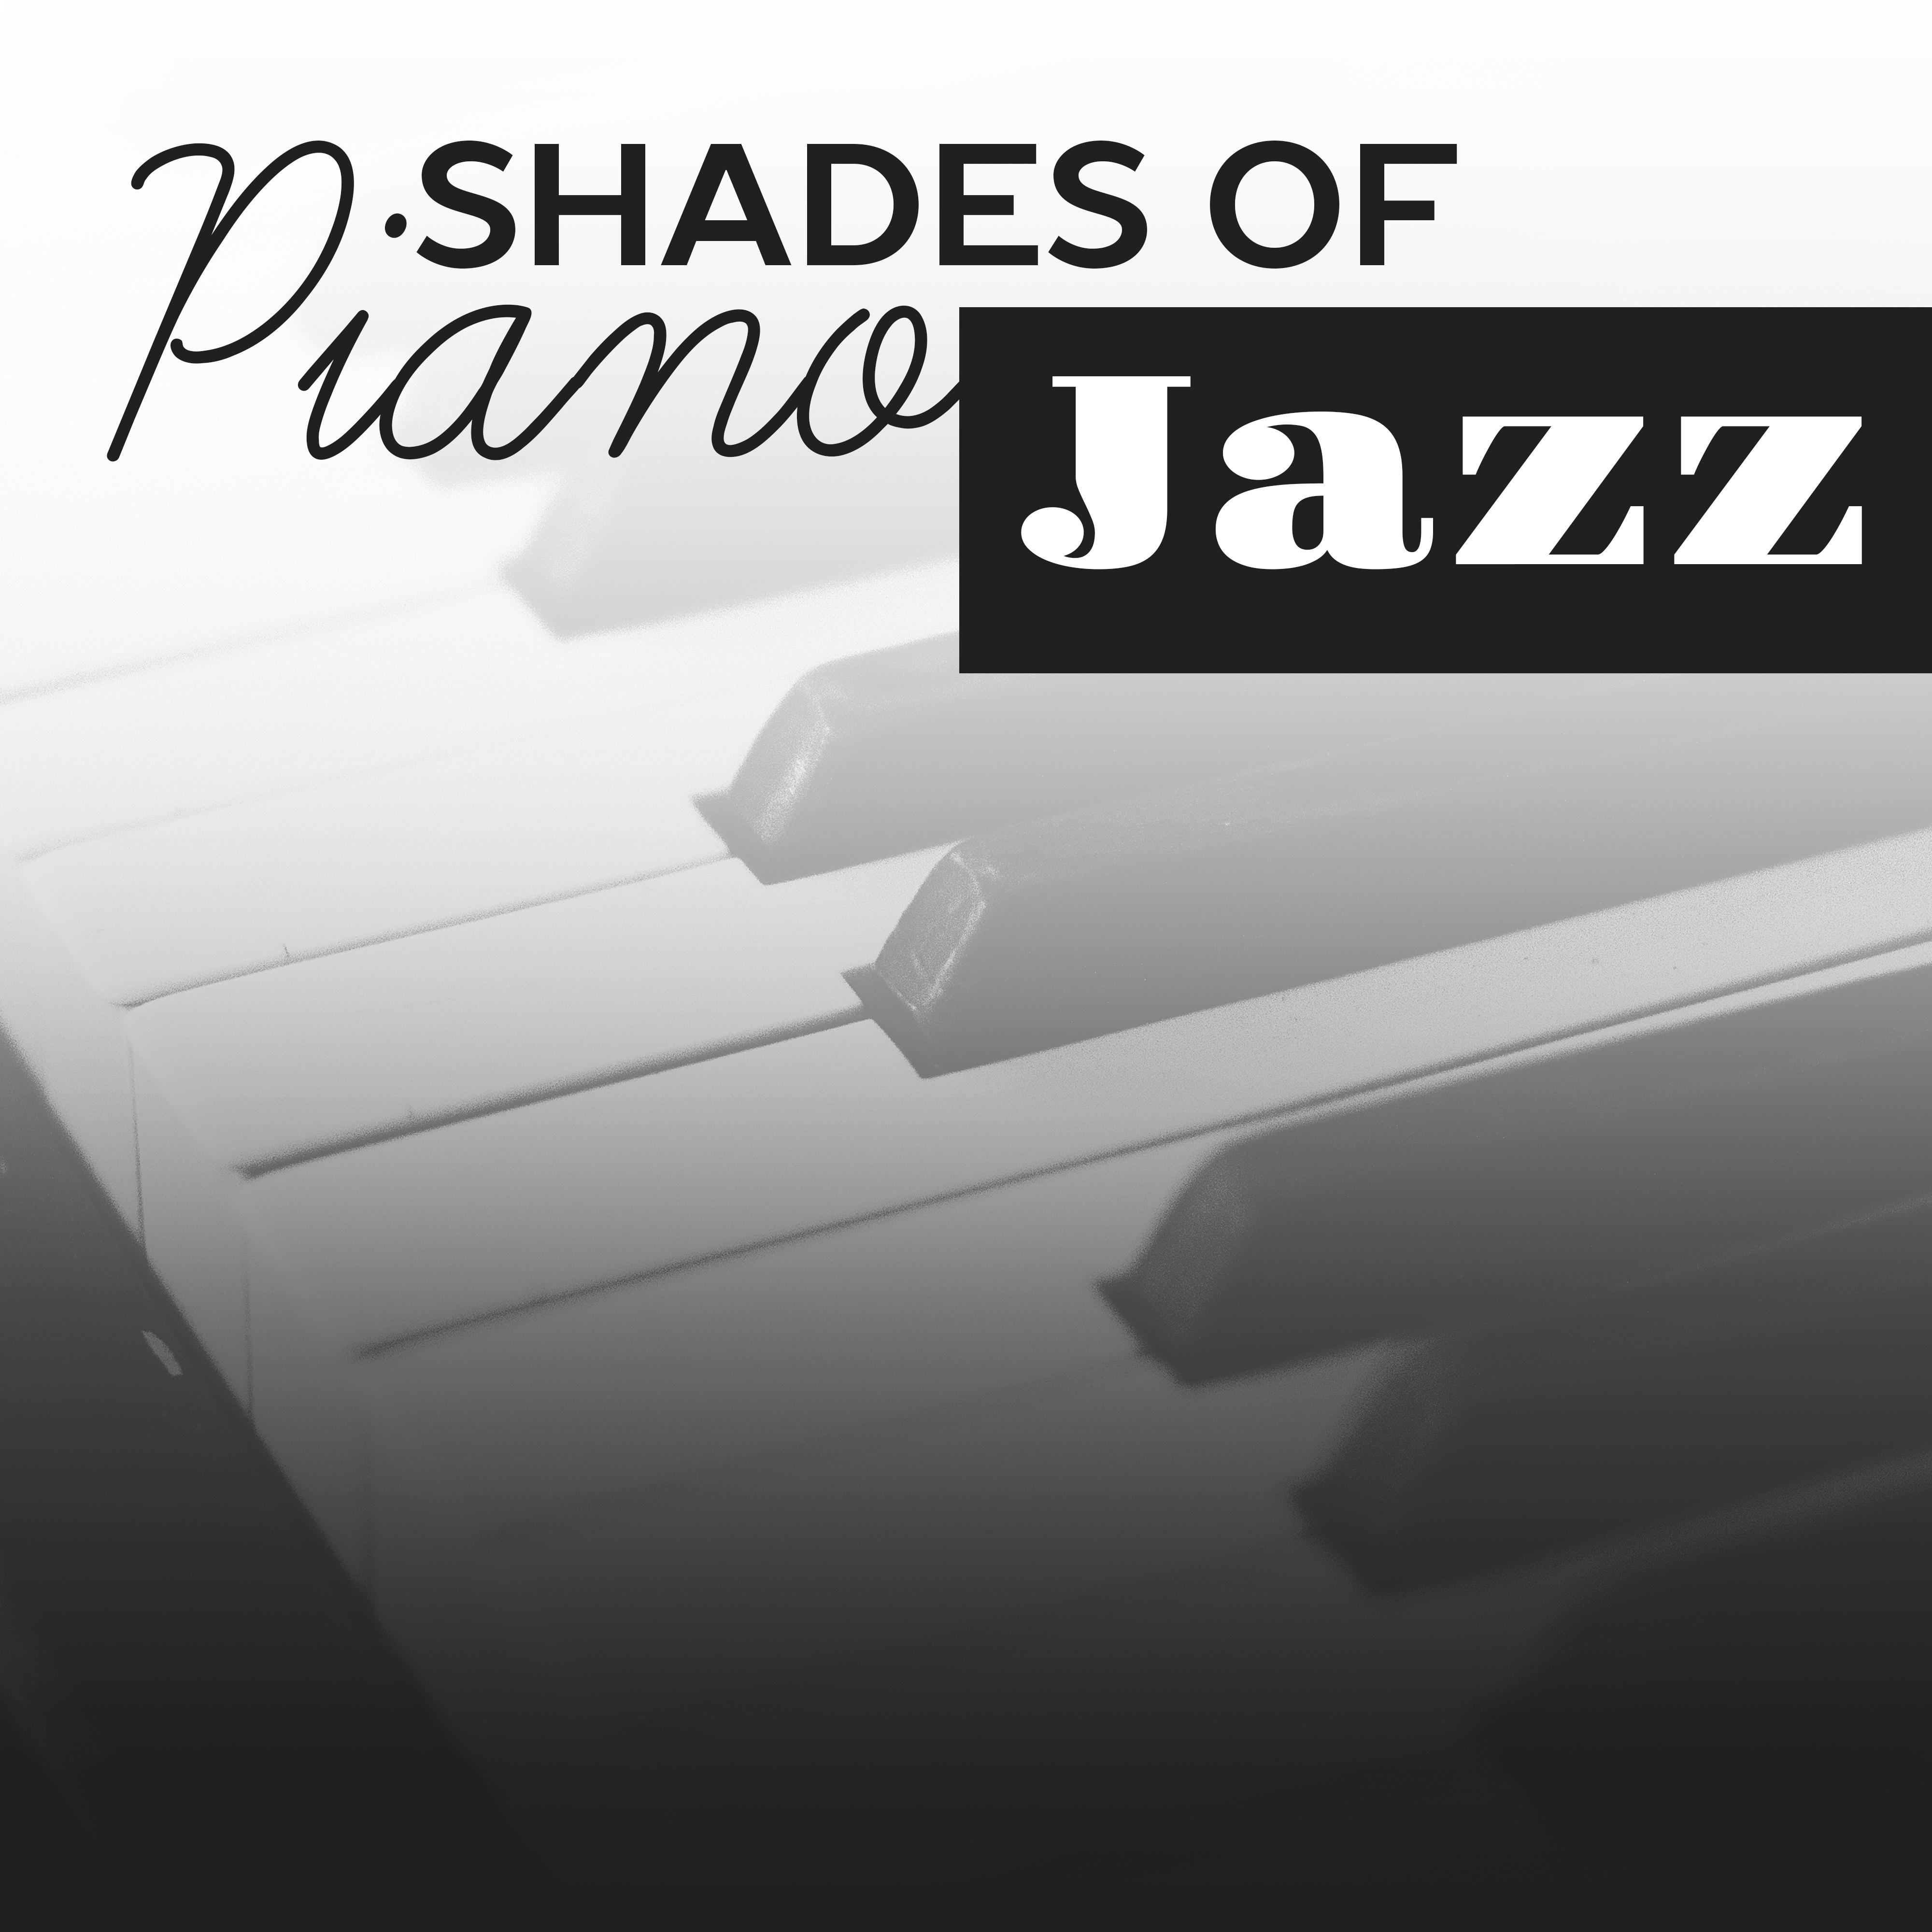 Shades of Piano Jazz  Calming Sounds, Jazz to Relax, Rest a Bit, Easy Listening, Stress Relief